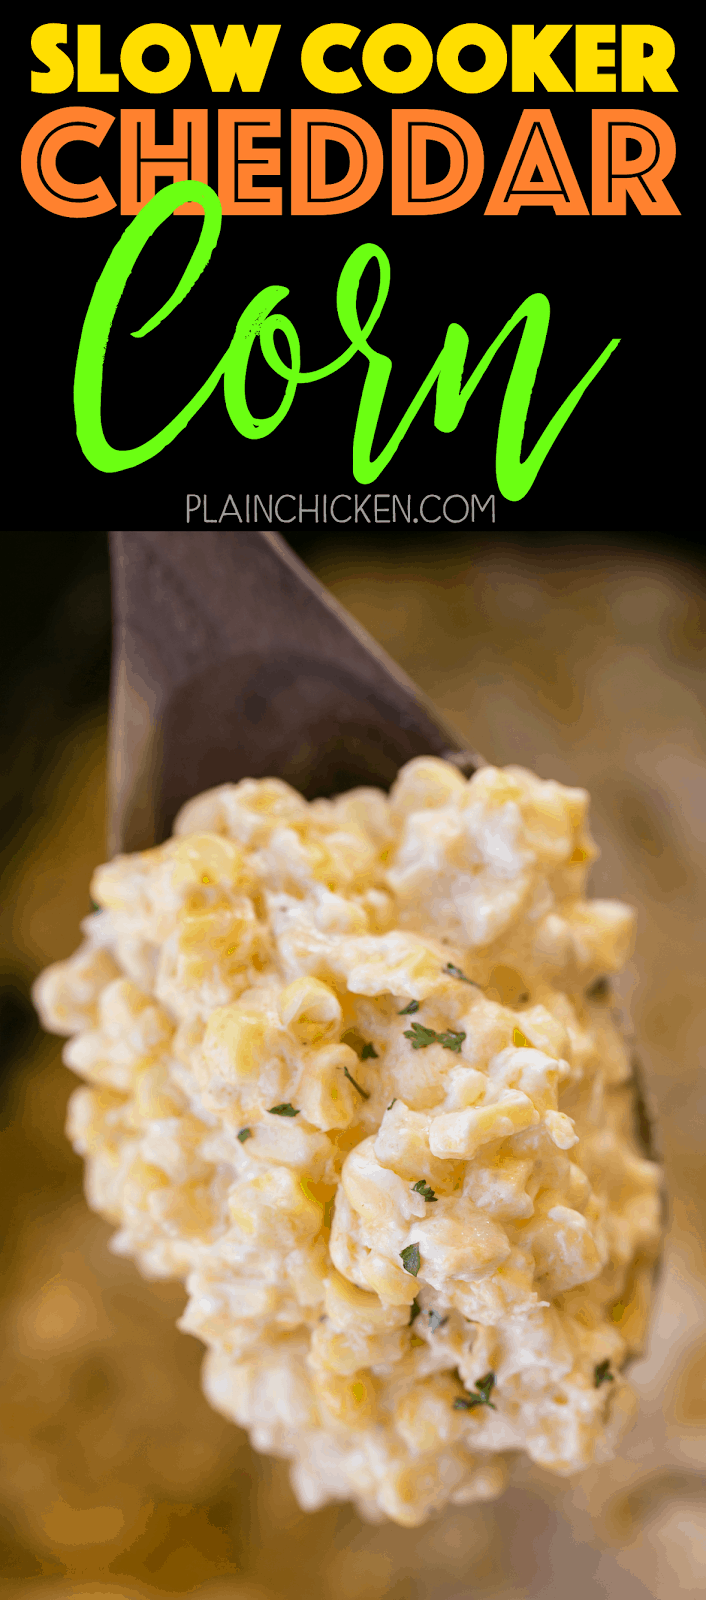 Slow Cooker Cheddar Corn - this stuff is AMAZING!! Just dump everything in the slow cooker and let it work its magic! Frozen corn, cream cheese, cheddar cheese, butter, heavy cream, salt and pepper. Great side dish for a potluck! There is never any left! Such an easy side dish recipe!!